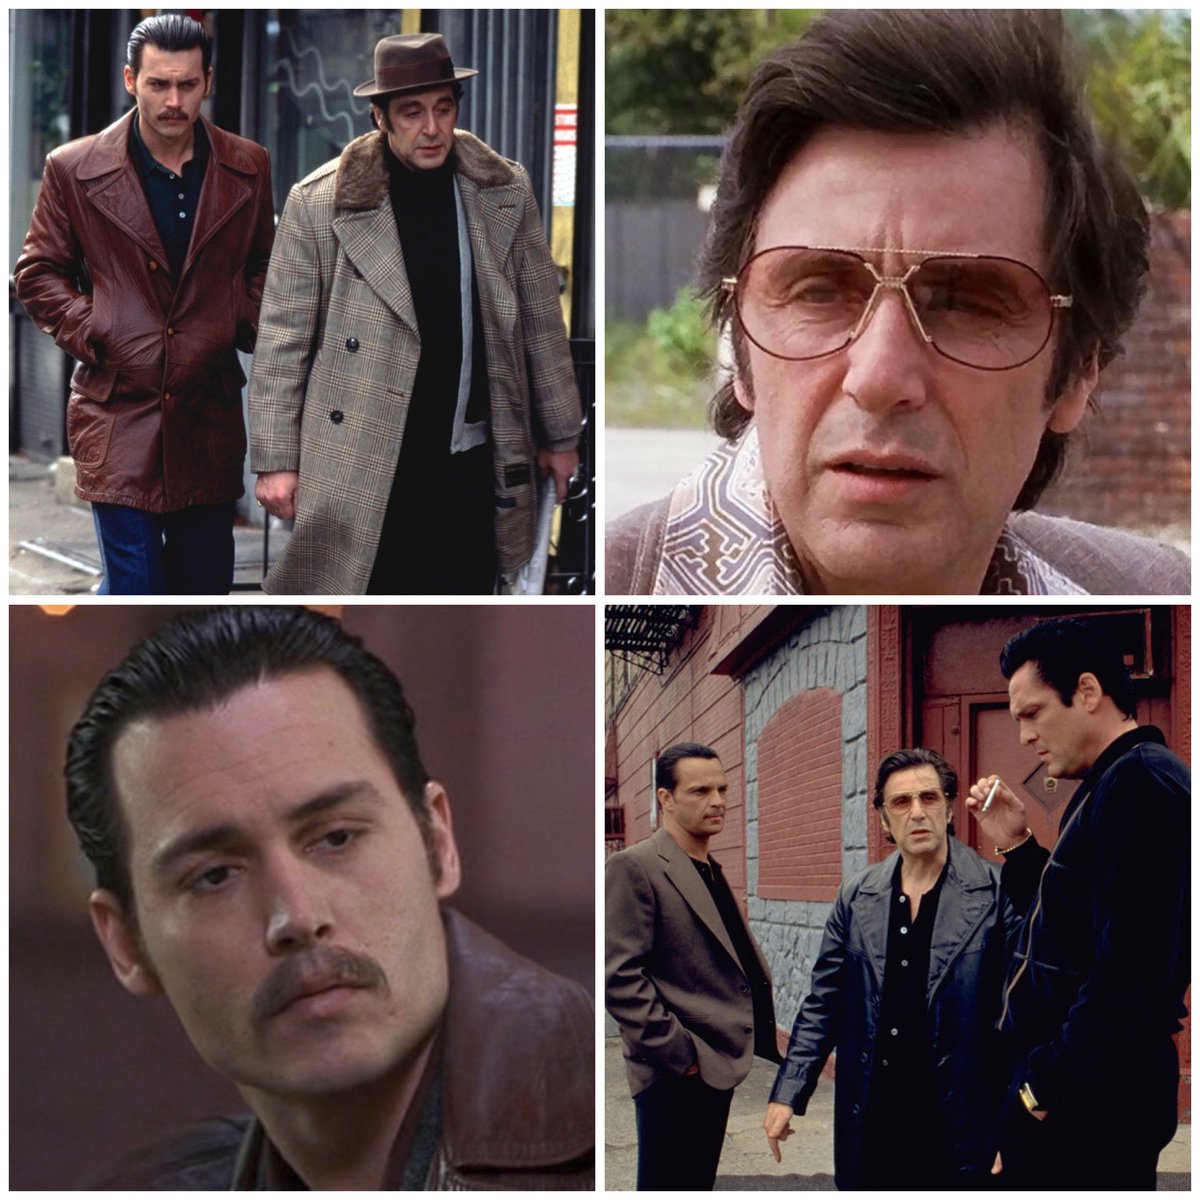 February 28, 1997: On this day in film history, 𝐃𝐎𝐍𝐍𝐈𝐄 𝐁𝐑𝐀𝐒𝐂𝐎 was released. 

#DonnieBrasco